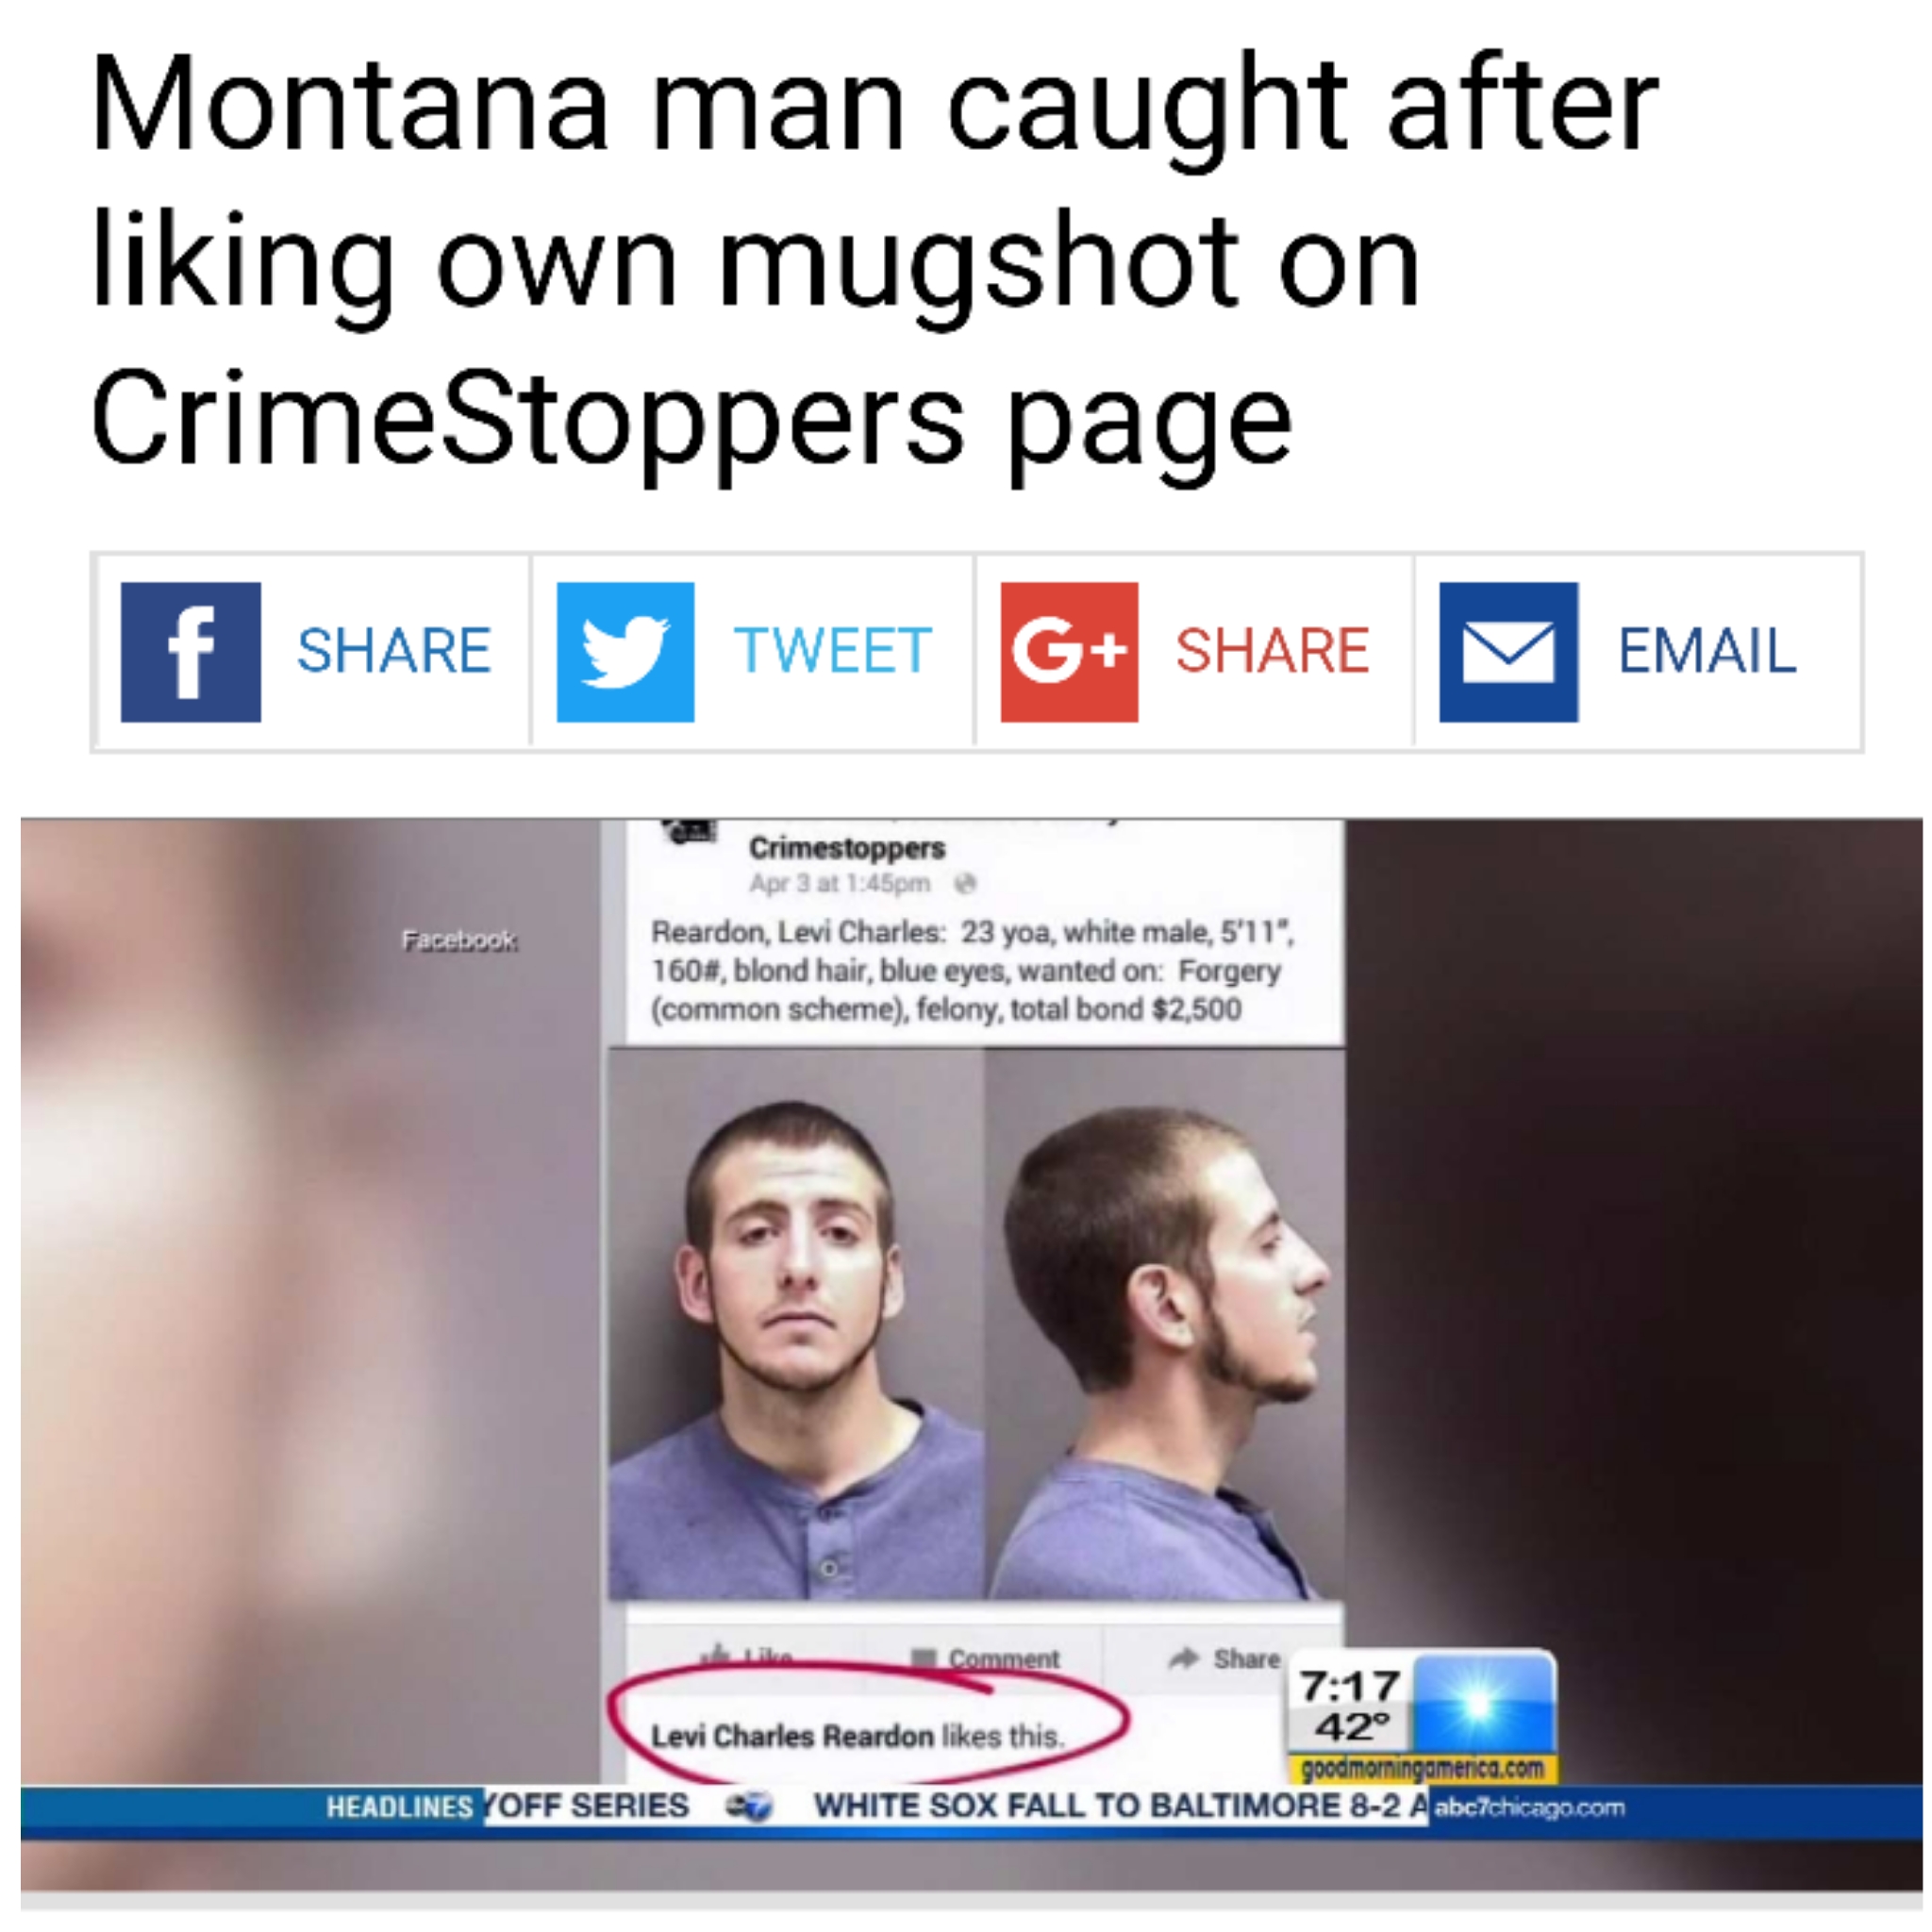 craziest florida man headlines - Montana man caught after liking own mugshot on Crime Stoppers page f O Tweet G Email Crimestoppers Reardon Levi Charles 23yoa white mal, 5'11" 1602, blond hair blue eyes, wanted on Forgery common schemel, felony, total bon